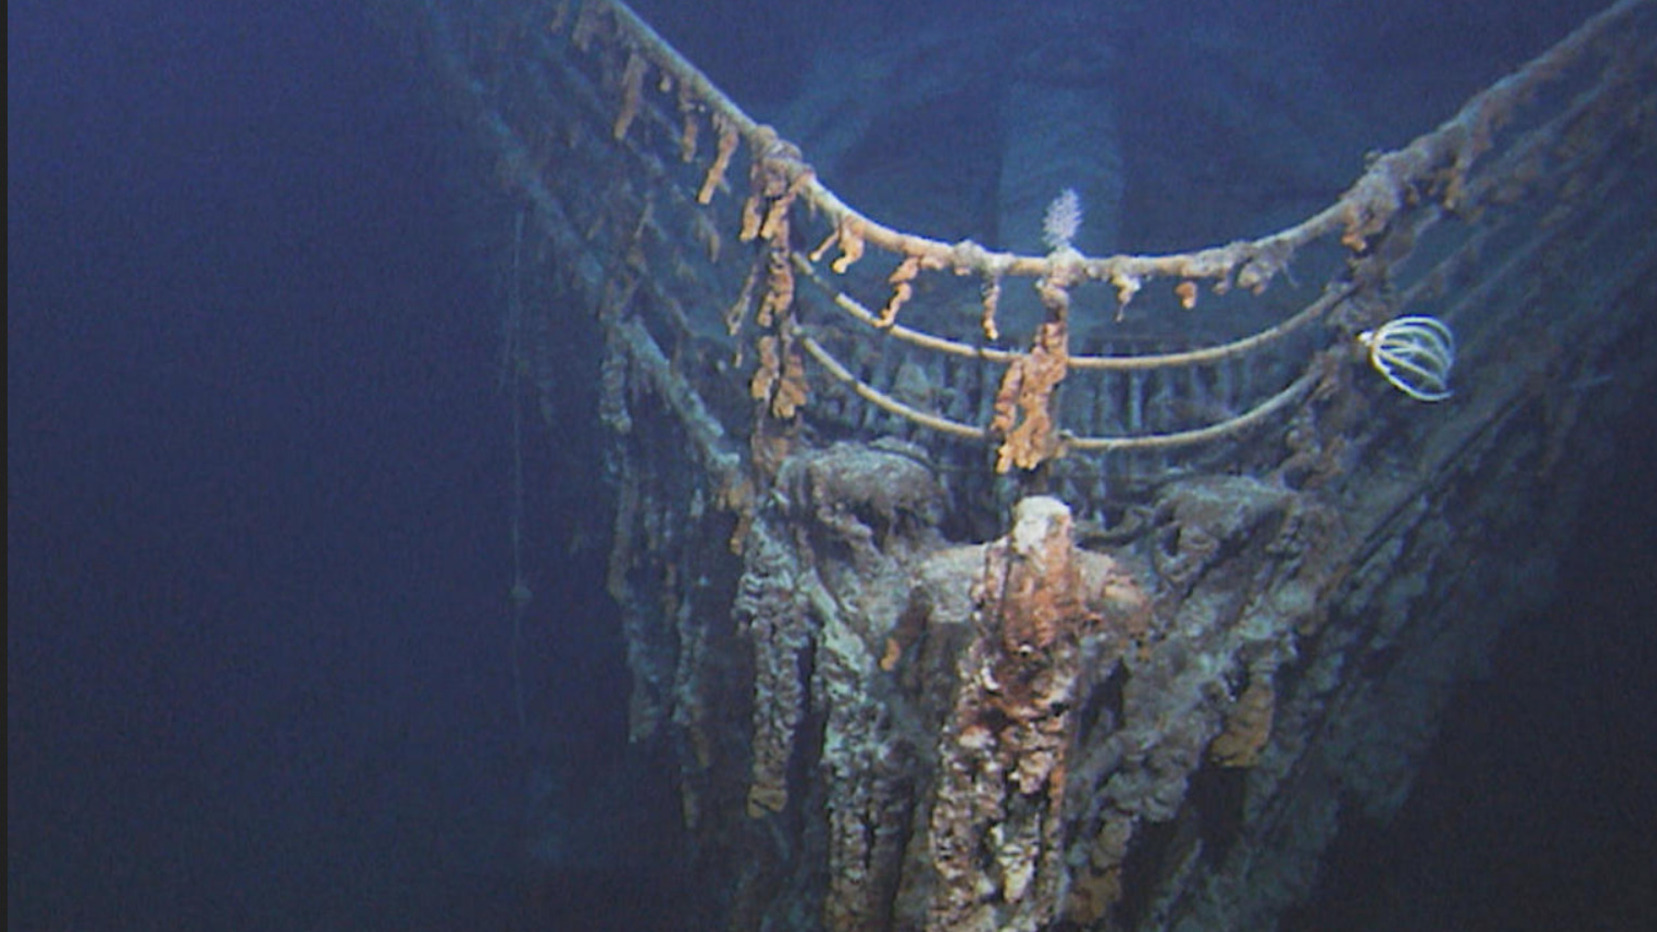 How does the Titanic look like now, to which the missing bathyscaphe descended